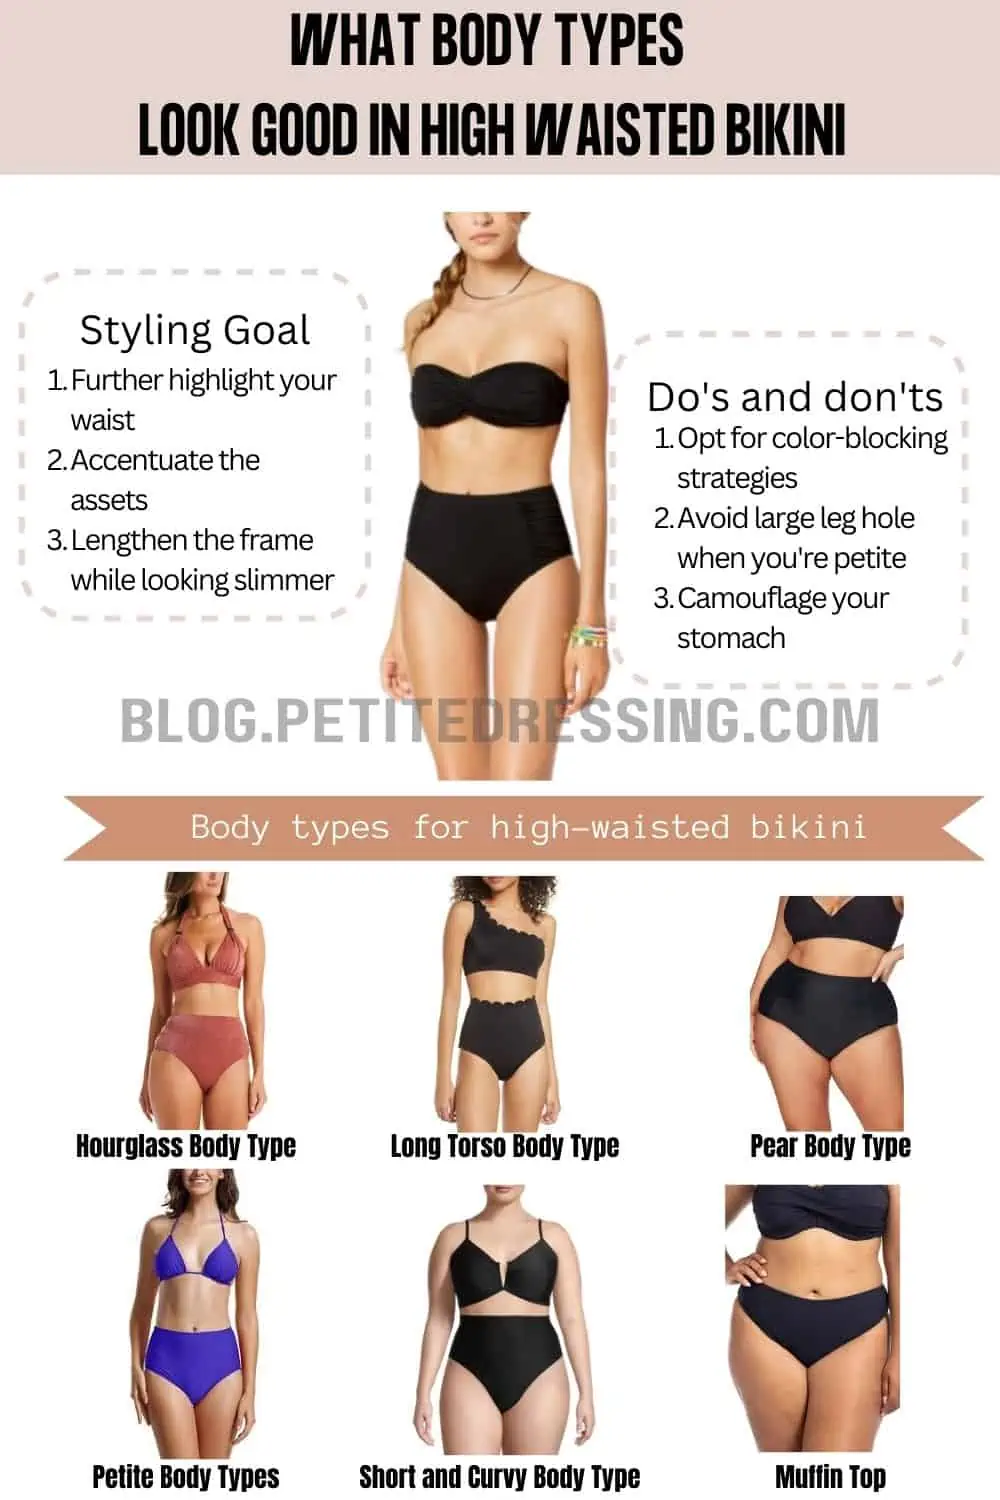 What Body Types Look Good in High Waisted Bikinis - Petite Dressing